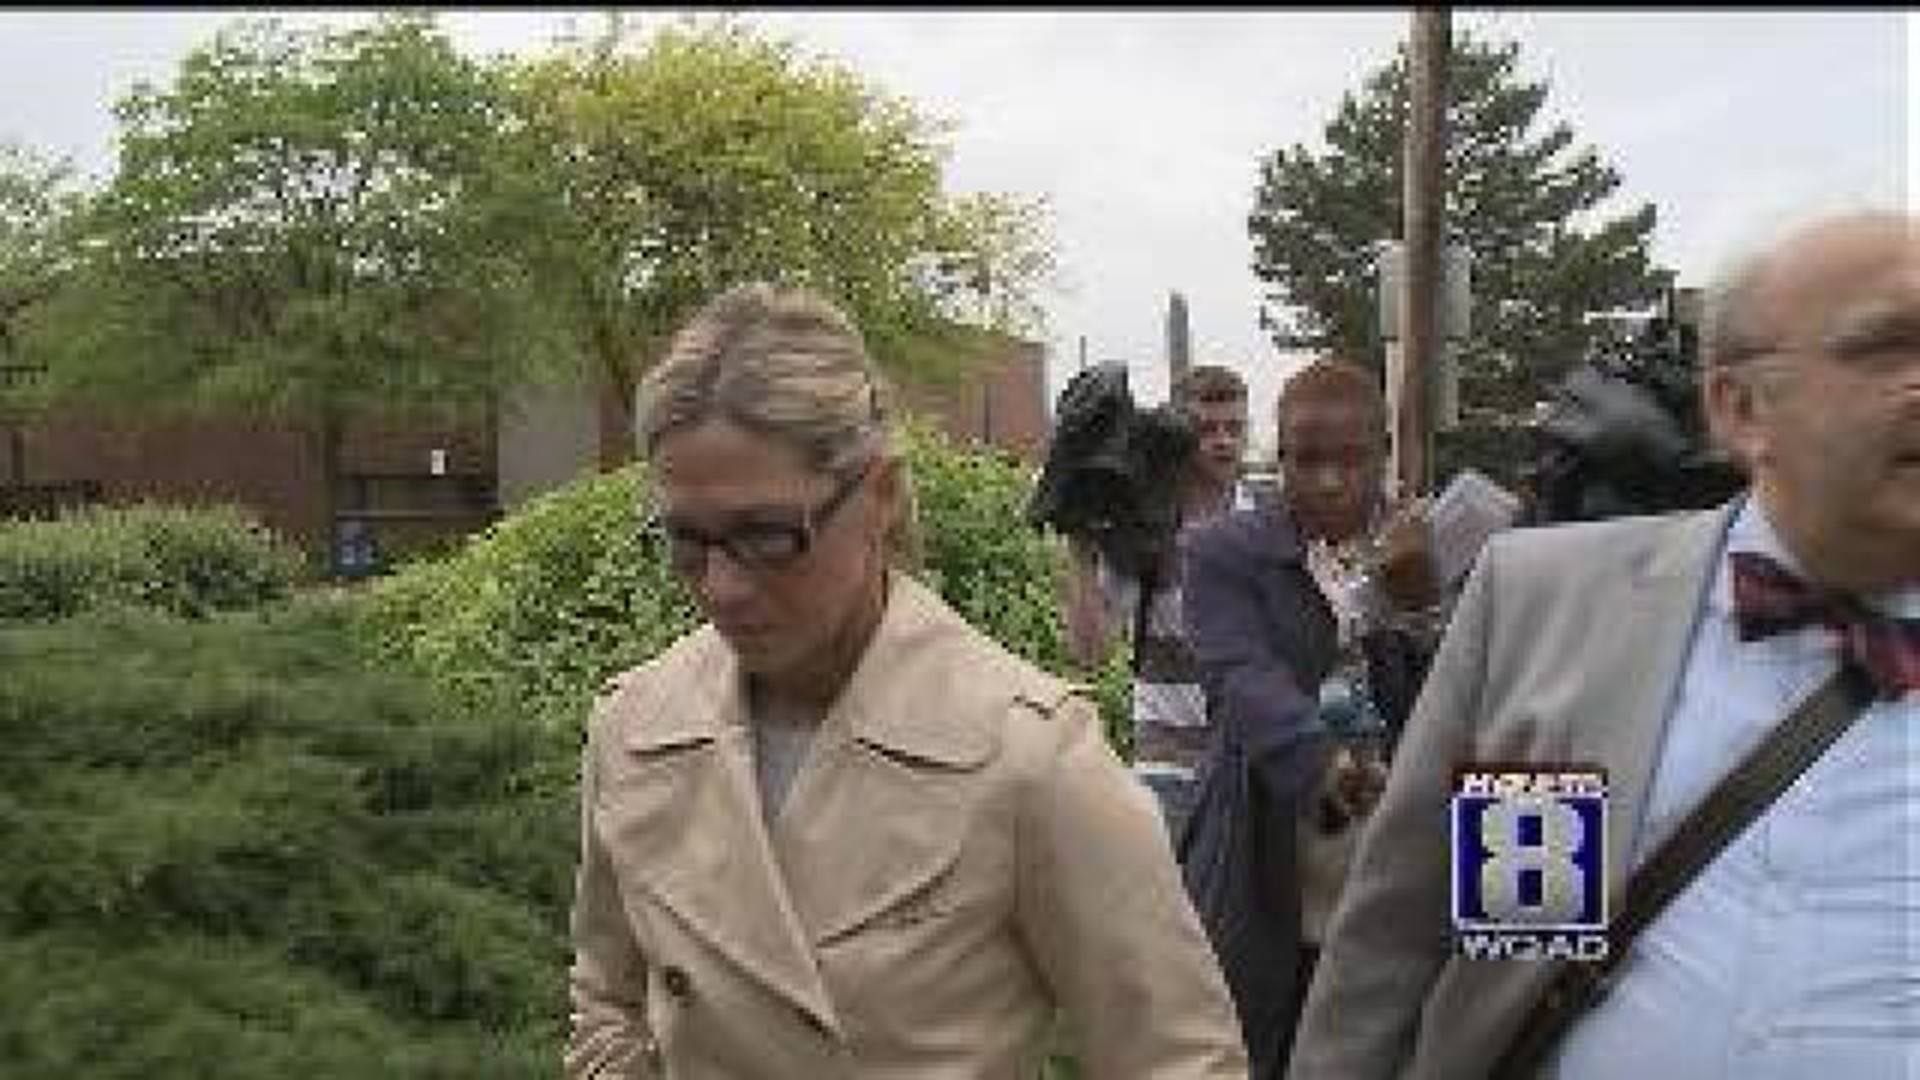 Rita Crundwell pleads not guilty